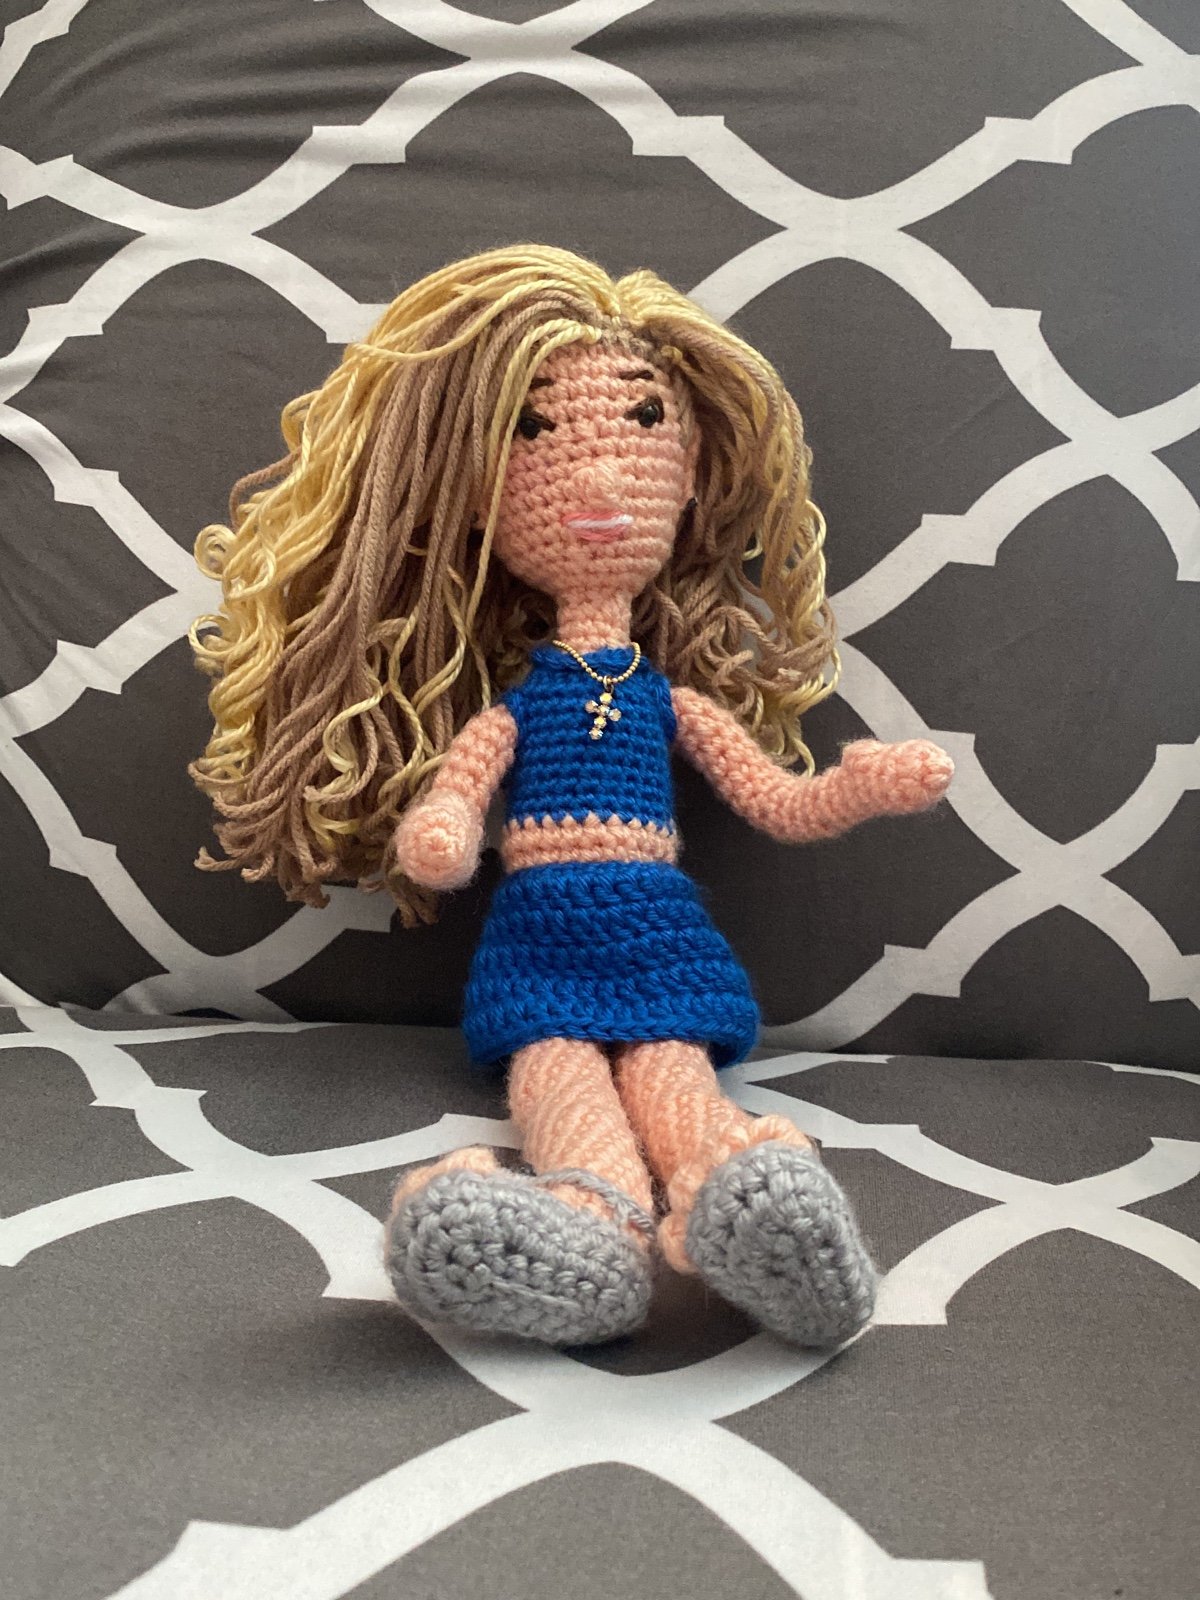 Beautiful 100% Crochet Blonde Doll with posable arms with Blue Outfit 2LVlSUUji